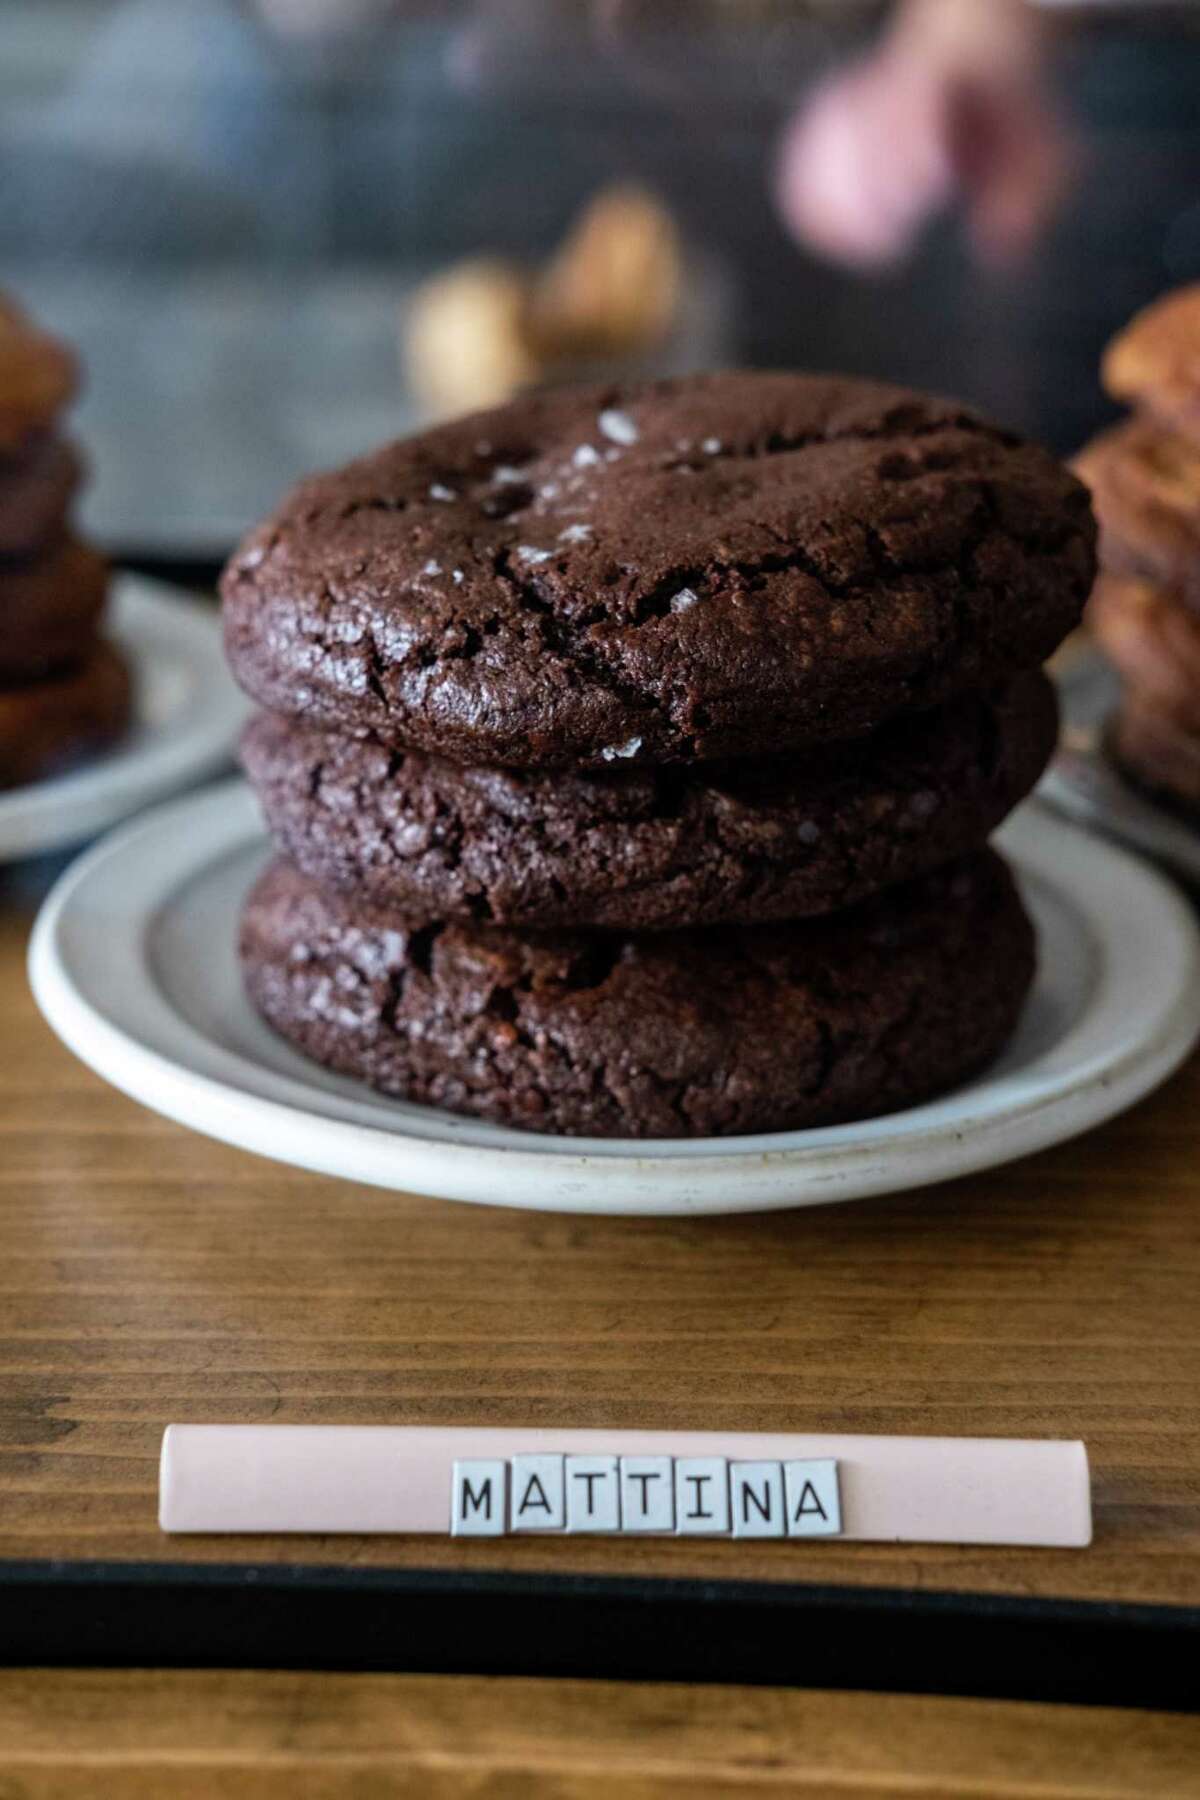 Double chocolate is just one of the many cookie flavors visitors to Mattina will find. The new Pacific Heights restaurant is slated to open in April.